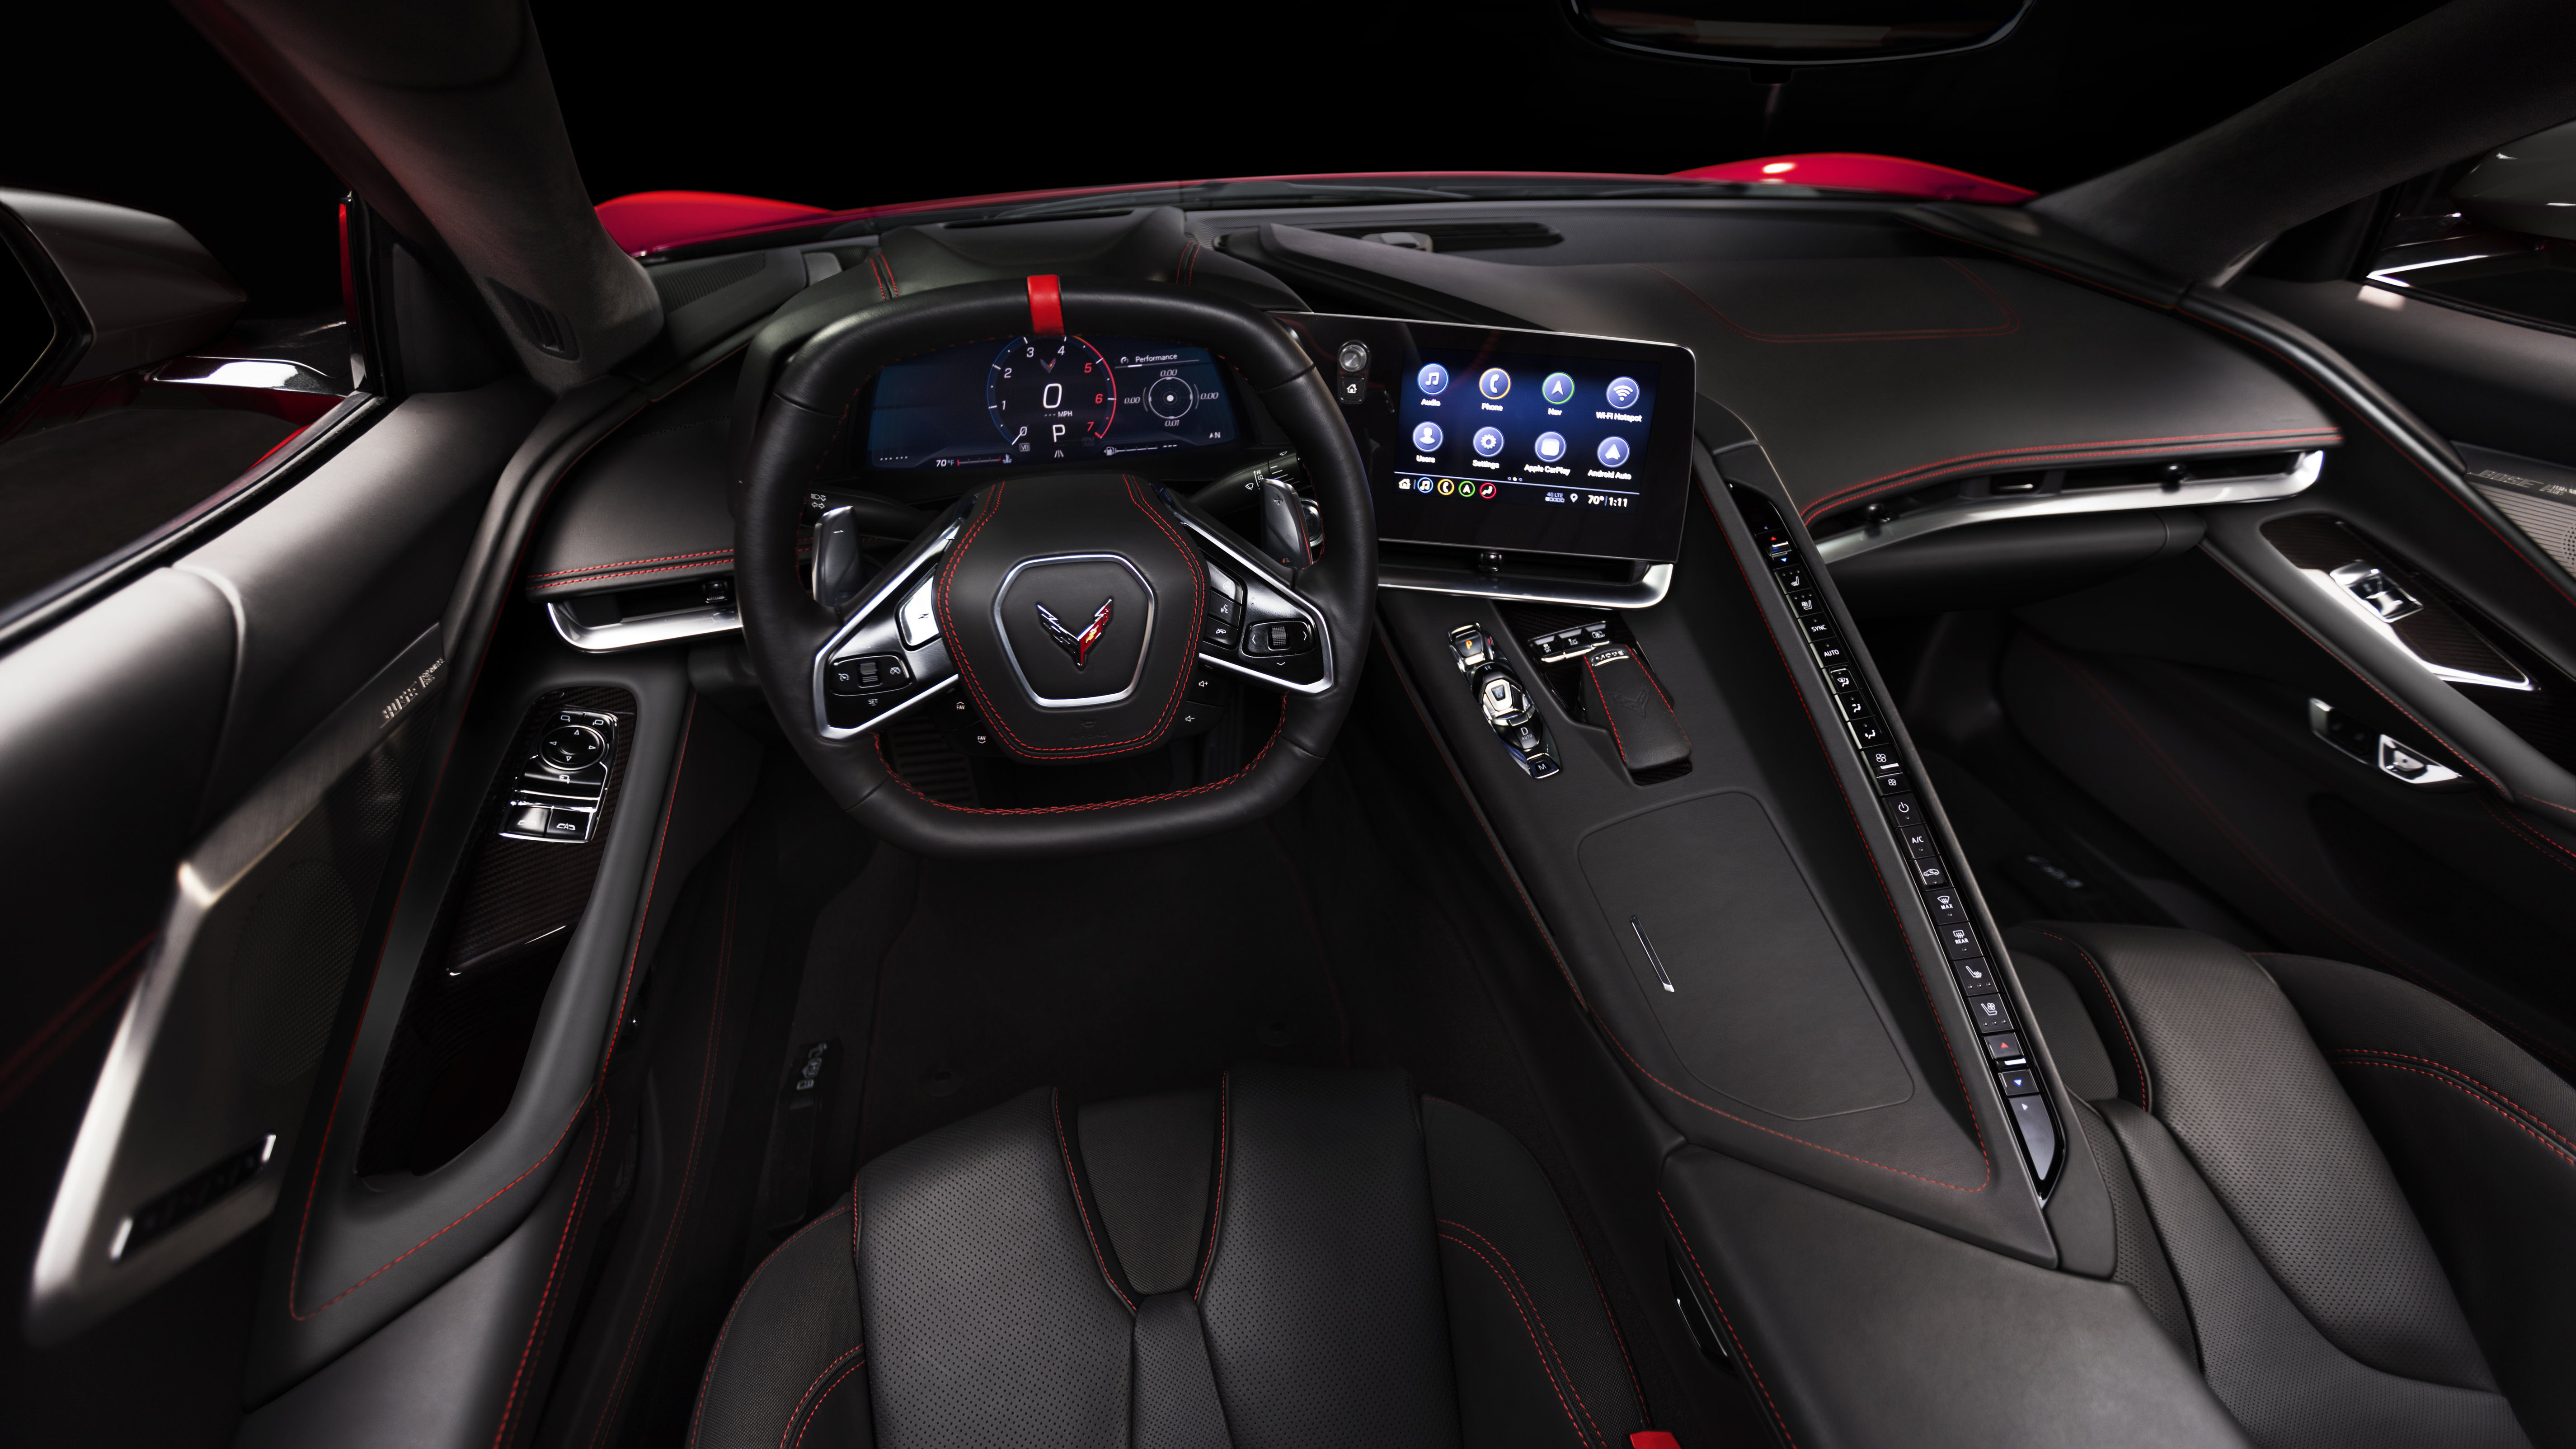 This is the interior of the C8 Chevy Corvette Autoblog